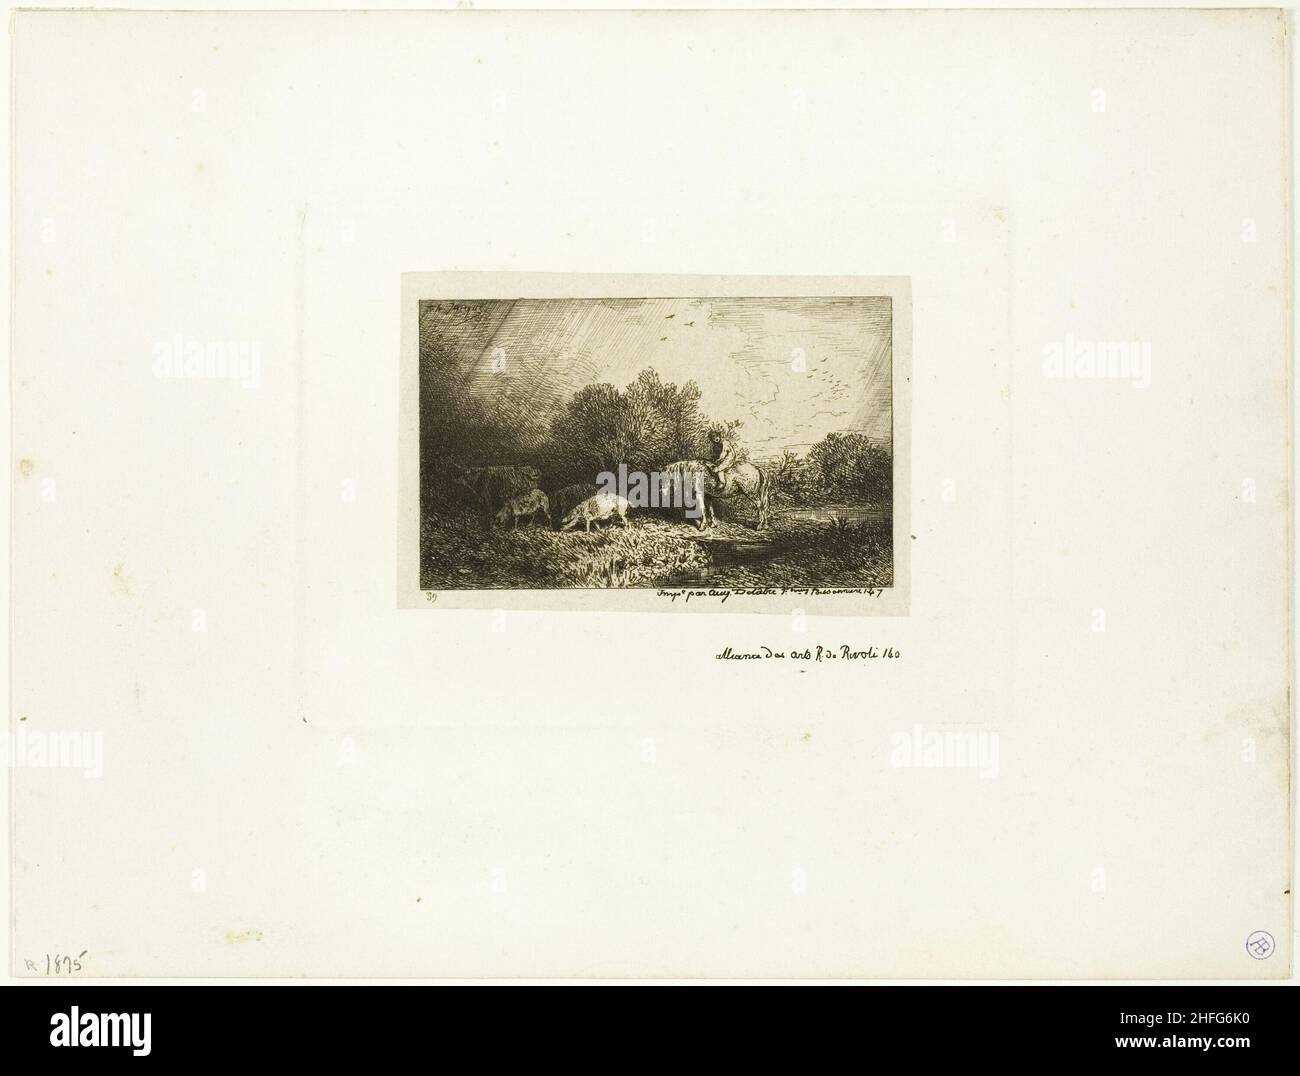 Landscape with Man on Horseback, Pigs and Cow, n.d. Stock Photo